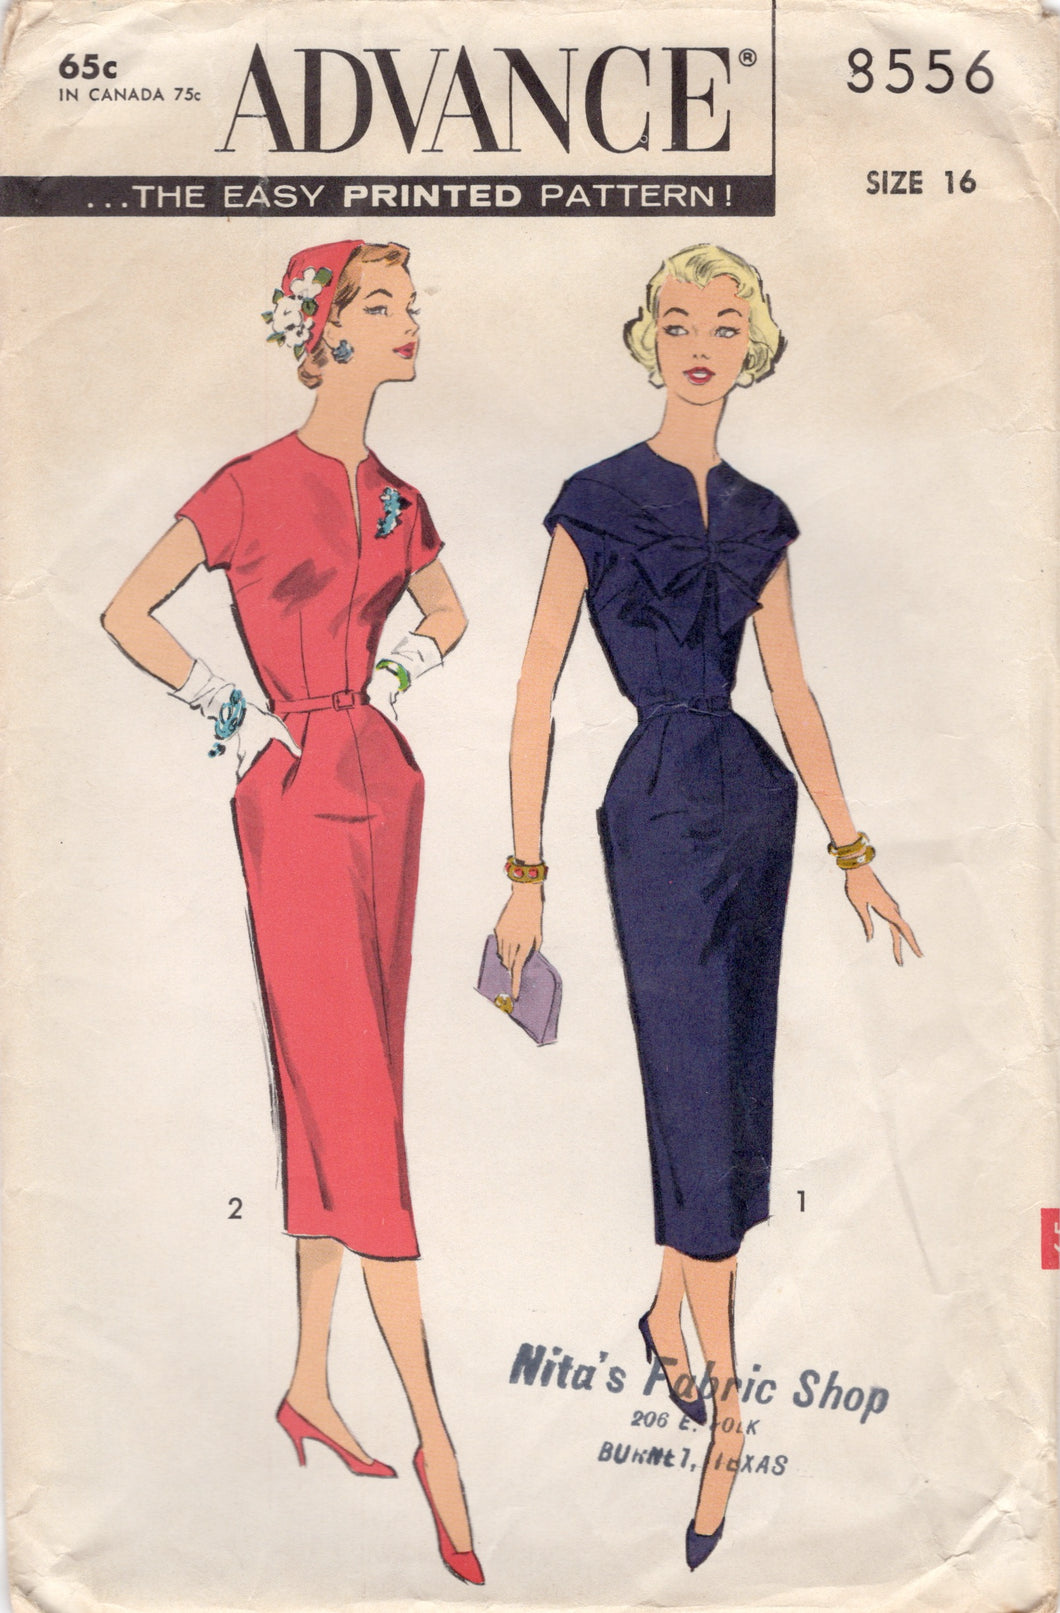 1950's Advance Sheath Dress Pattern with Slit Neckline and Draped Bow Accent pattern - Bust 36